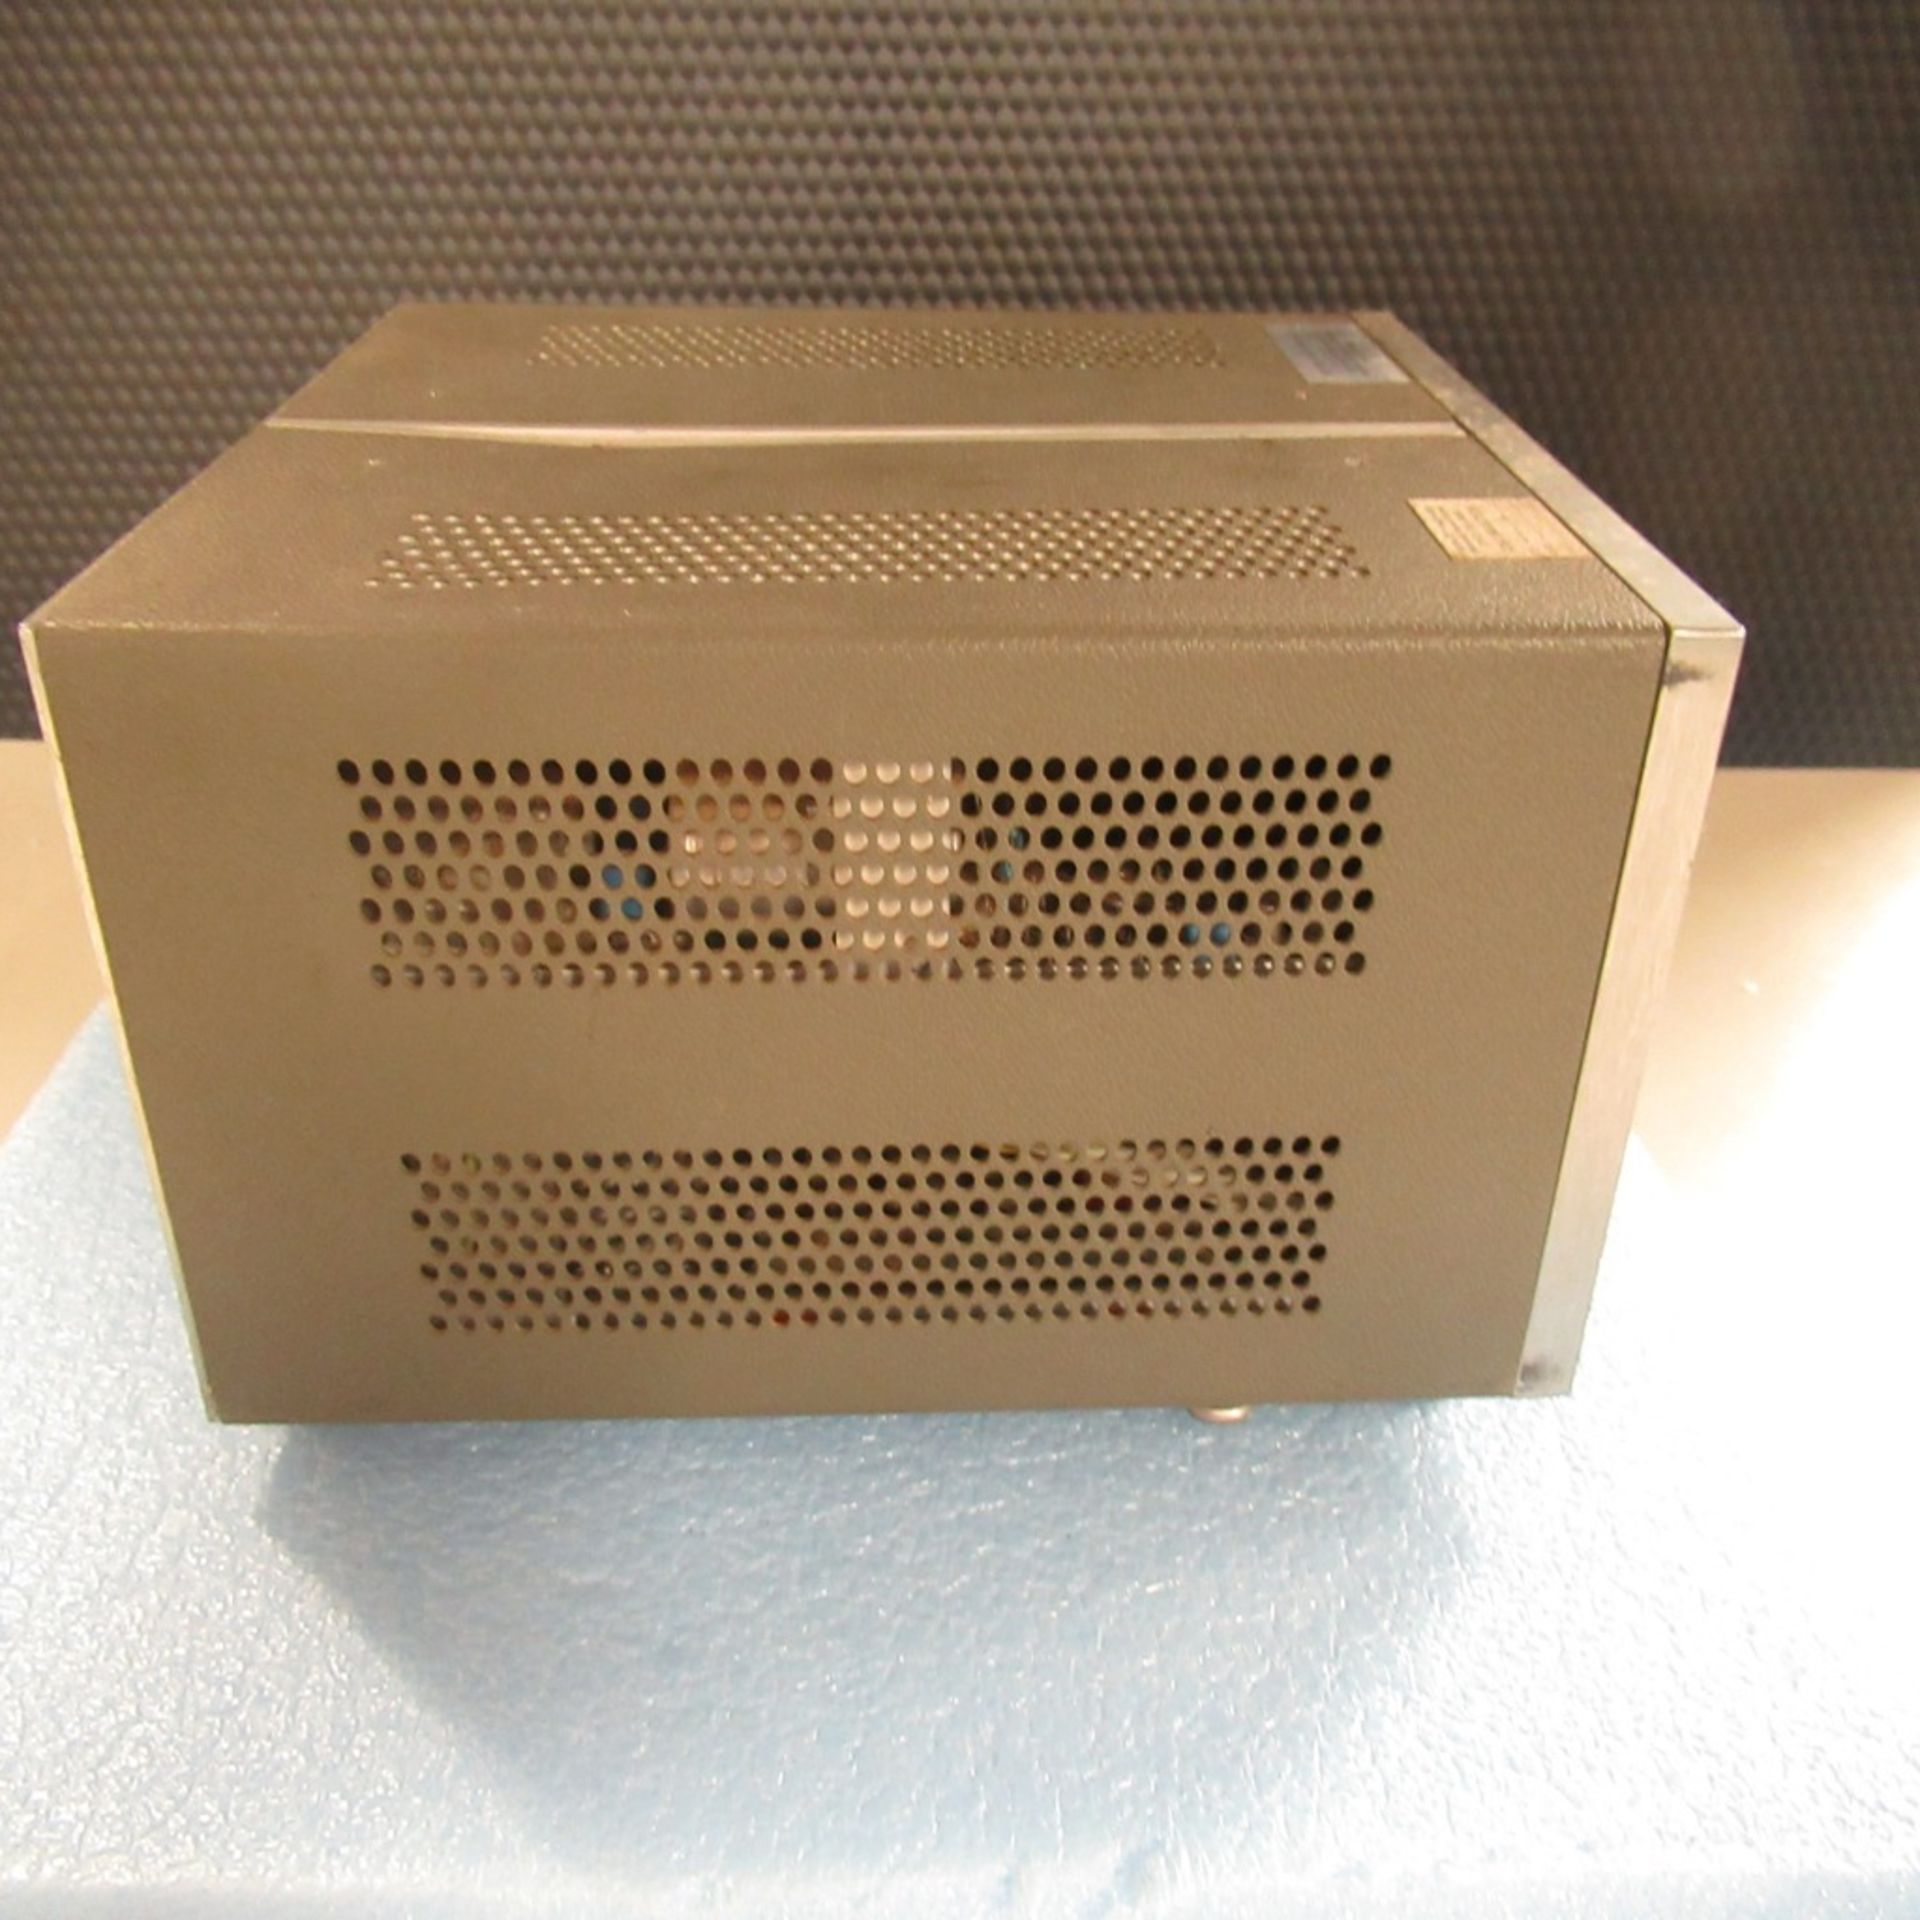 PHOTON SNAP SHOT MODEL 6000 *POWERS ON* NO SCREEN DISPLAY; FARNELL AP20-80 REGULATED POWER SUPPLY * - Image 97 of 222